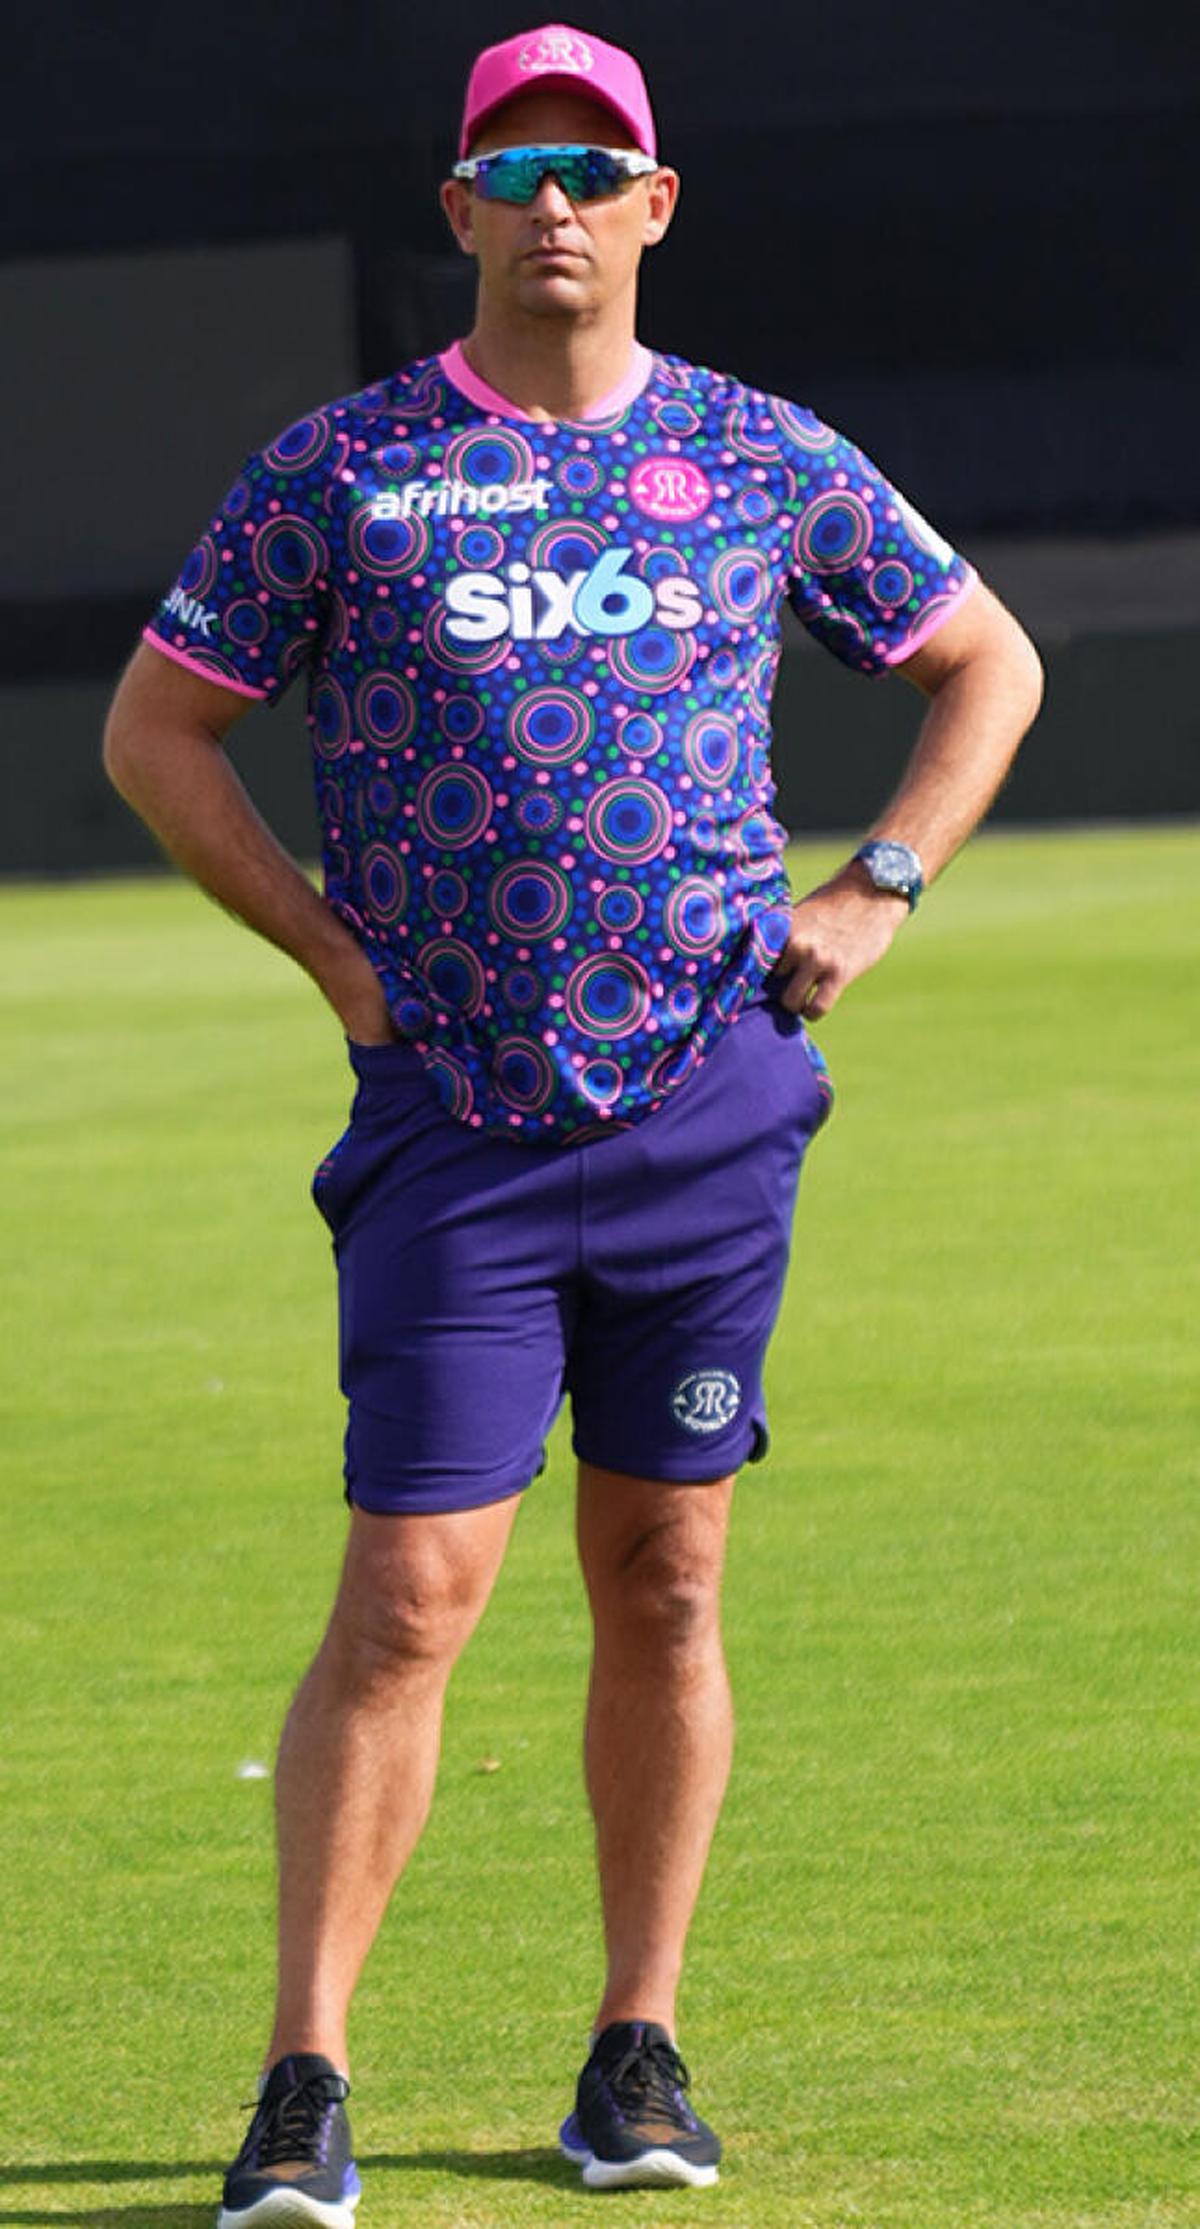 Stint in pink: Bond is enjoying working with the ‘mix of youth and experience’ at Paarl Royals. He is also looking forward to his new job with Rajasthan Royals, where he will be both assistant and fast-bowling coach. | Photo credit: Special Arrangement